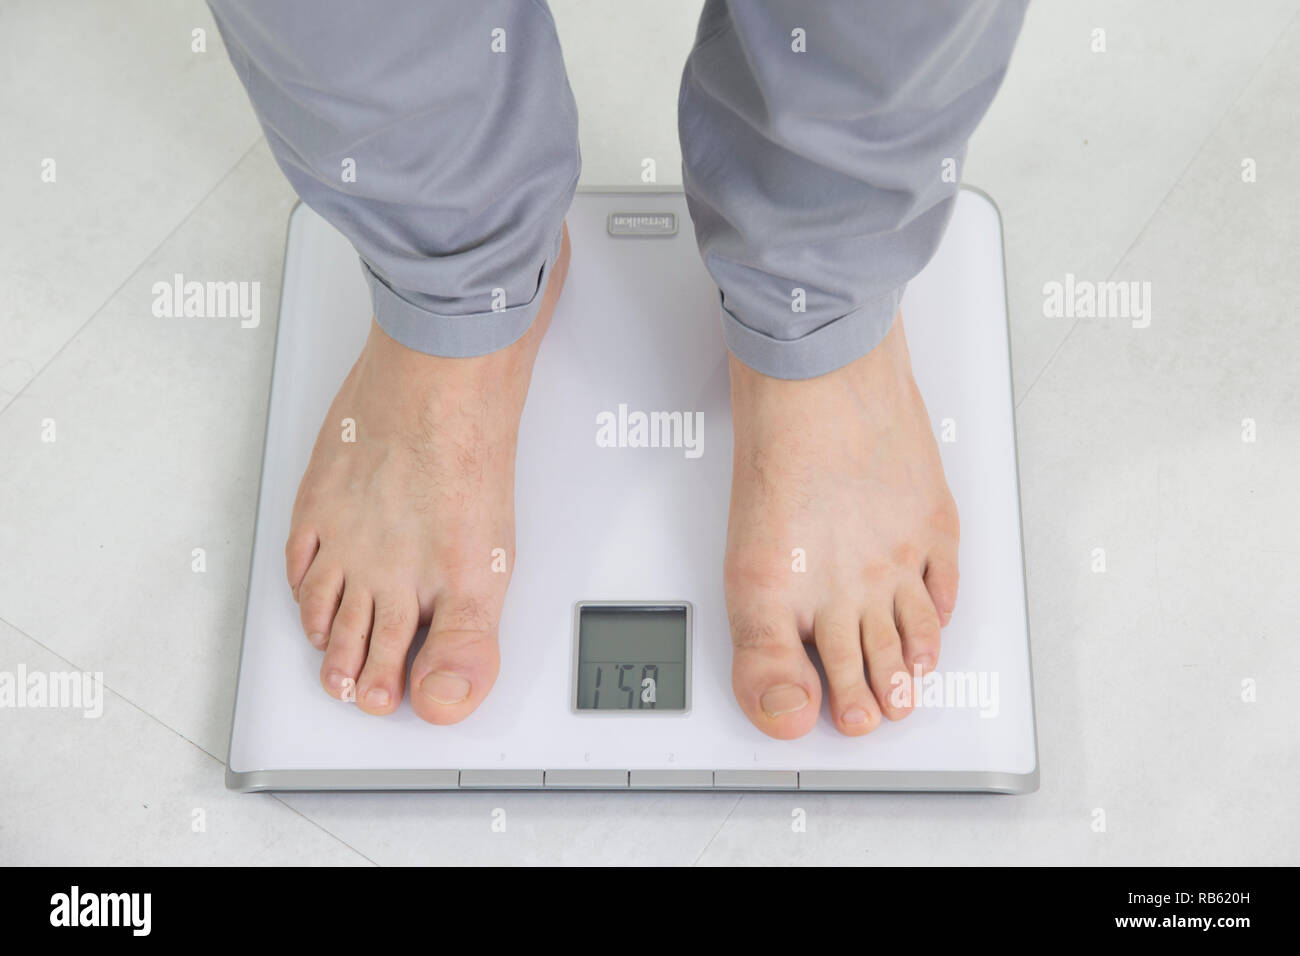 https://c8.alamy.com/comp/RB620H/man-on-weight-scale-RB620H.jpg